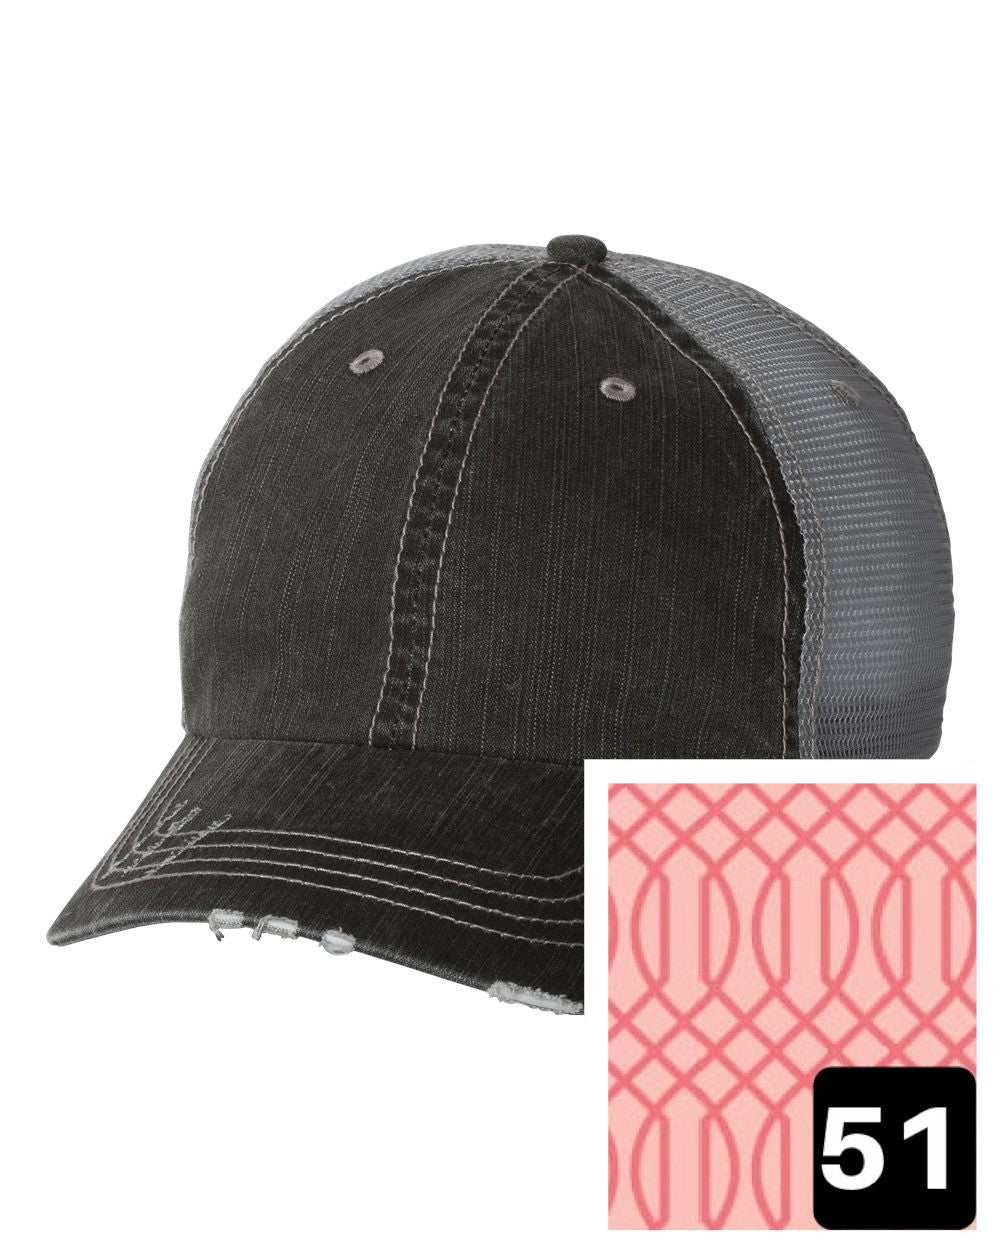 gray distressed trucker hat with white on gray hatch fabric state of Georgia